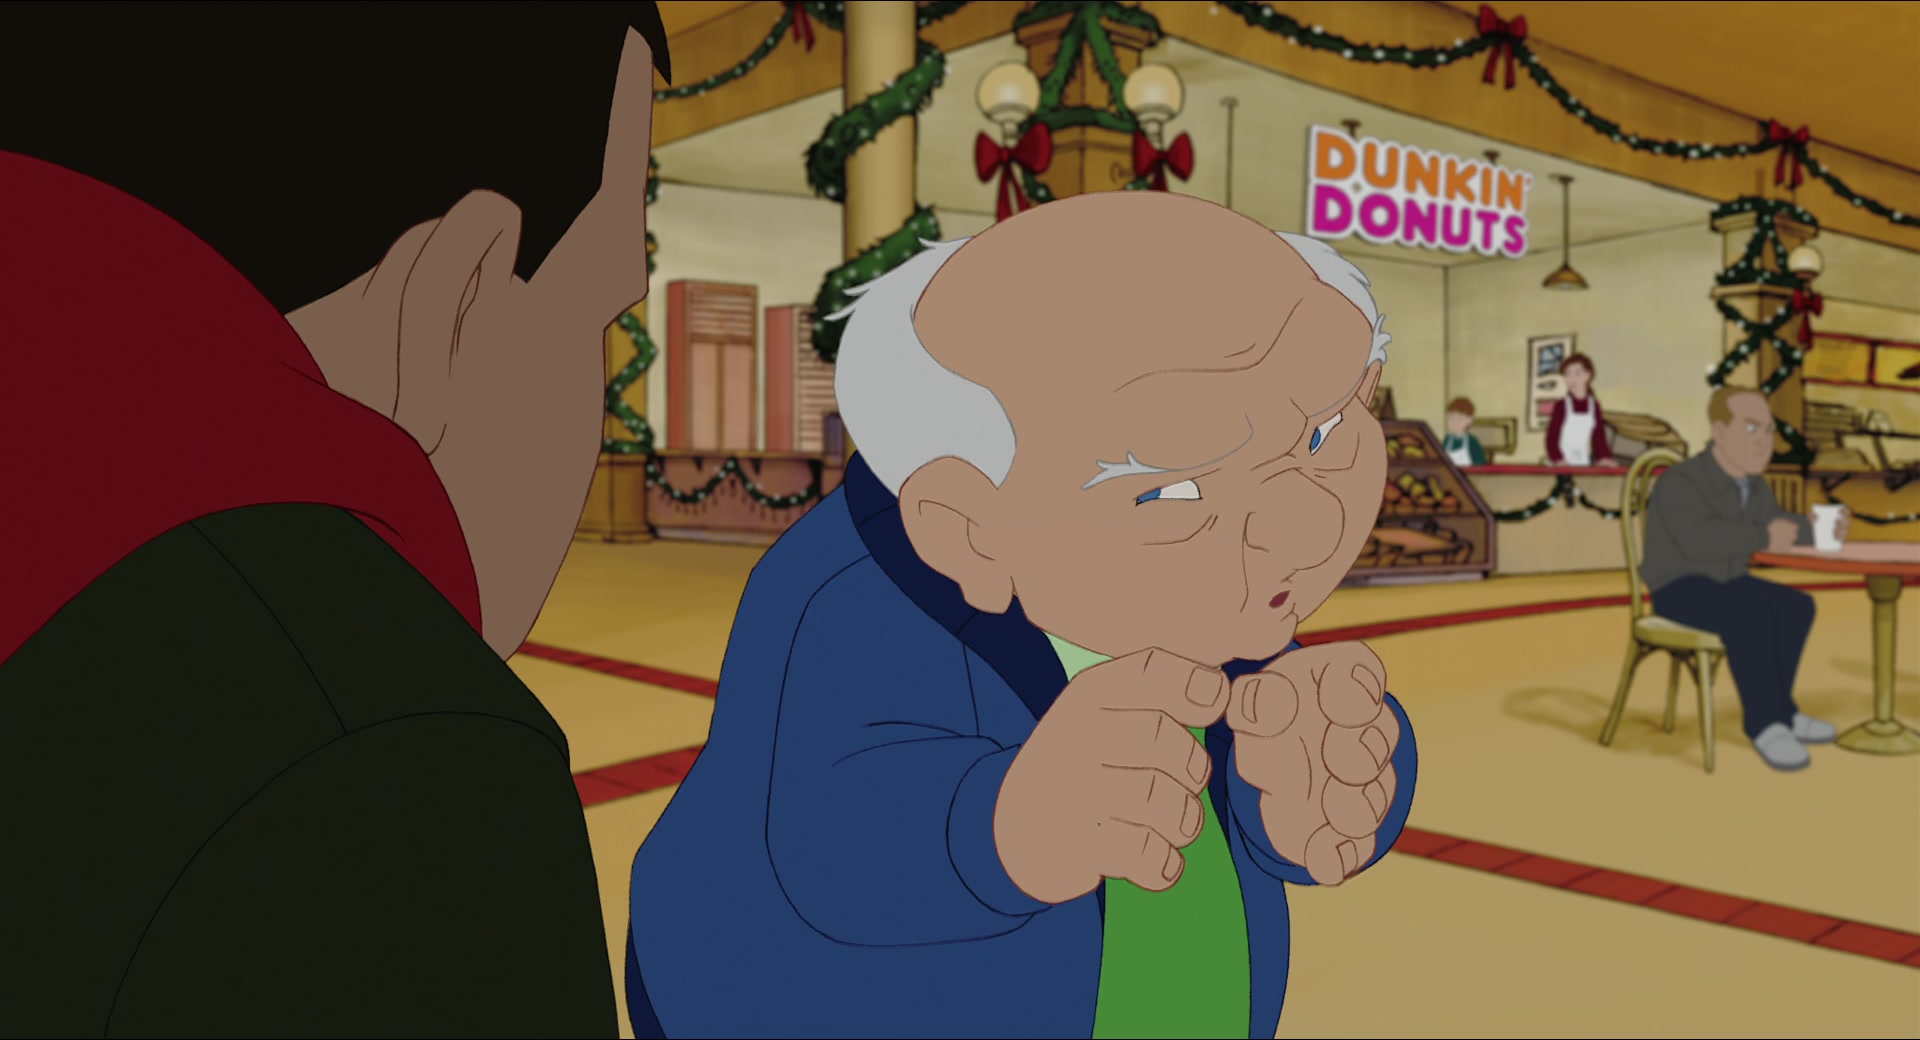 Dunkin' Donuts In Eight Crazy Nights (2002)